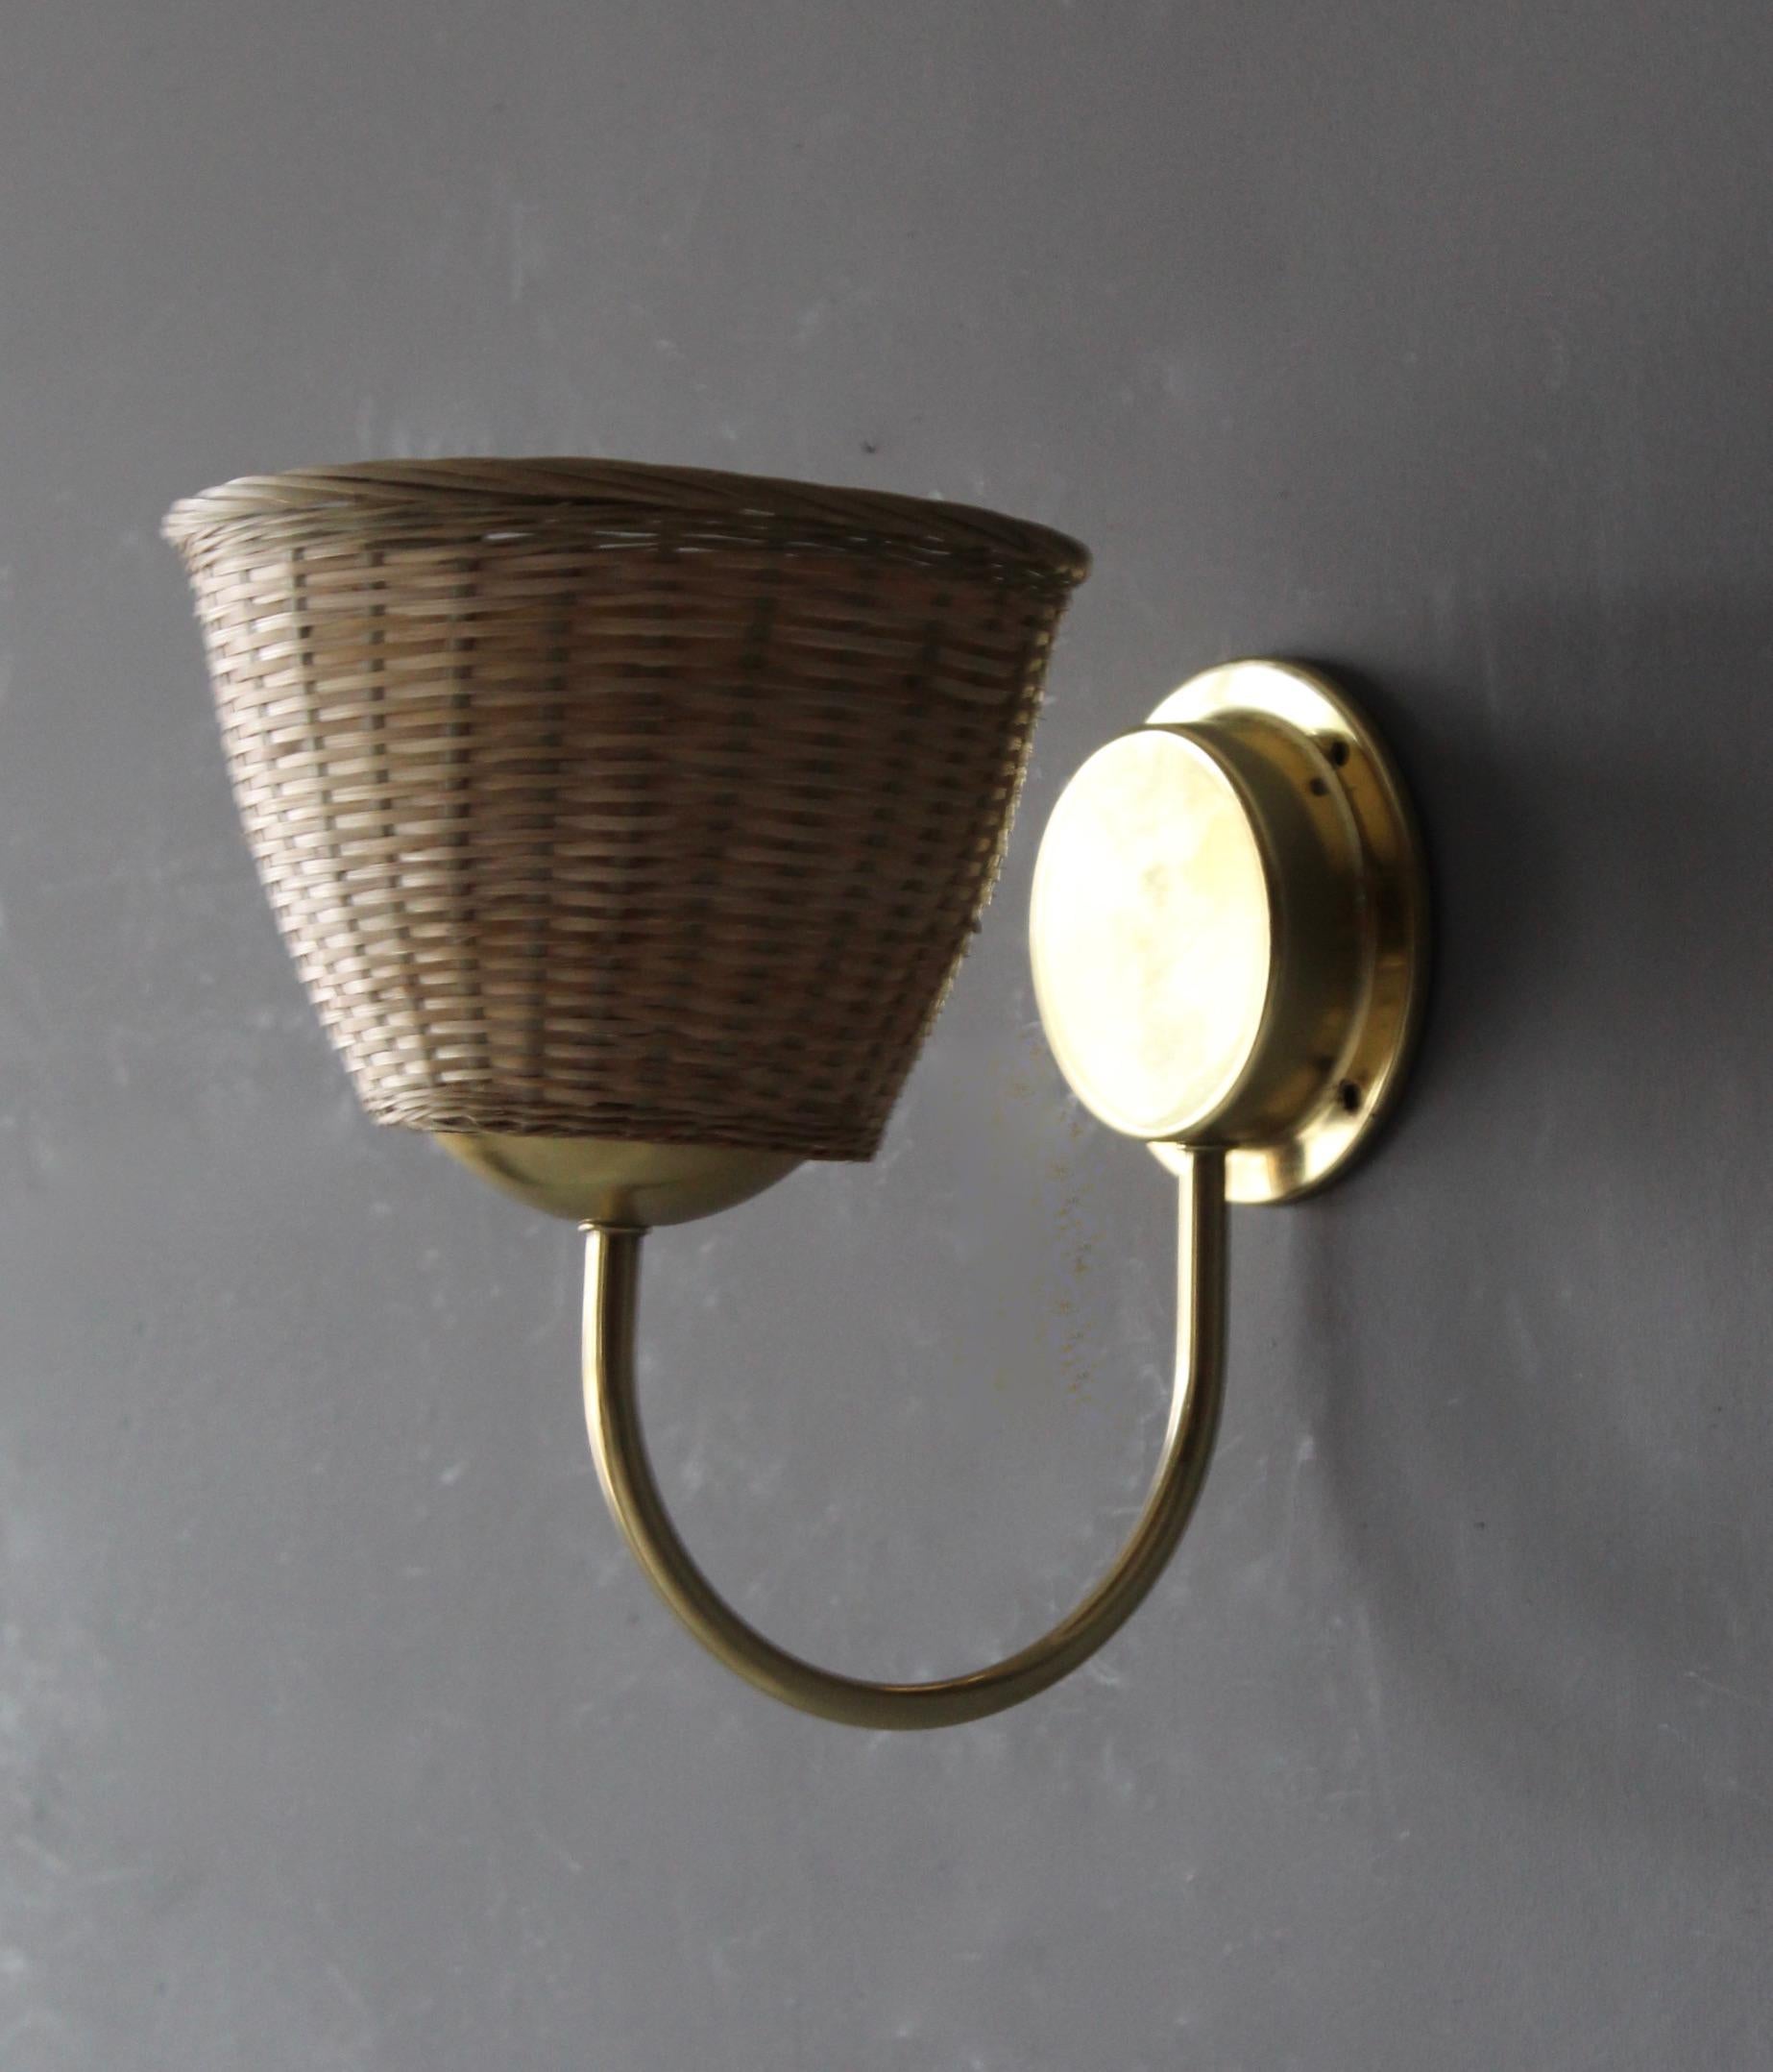 A wall light / sconce, designed and produced in Sweden, 1960s-1970s. Features brass. Assorted vintage rattan lampshade.

Takes one lightbulb on E27 socket. No stated max wattage, not UL listed. Configured for hardwire.

